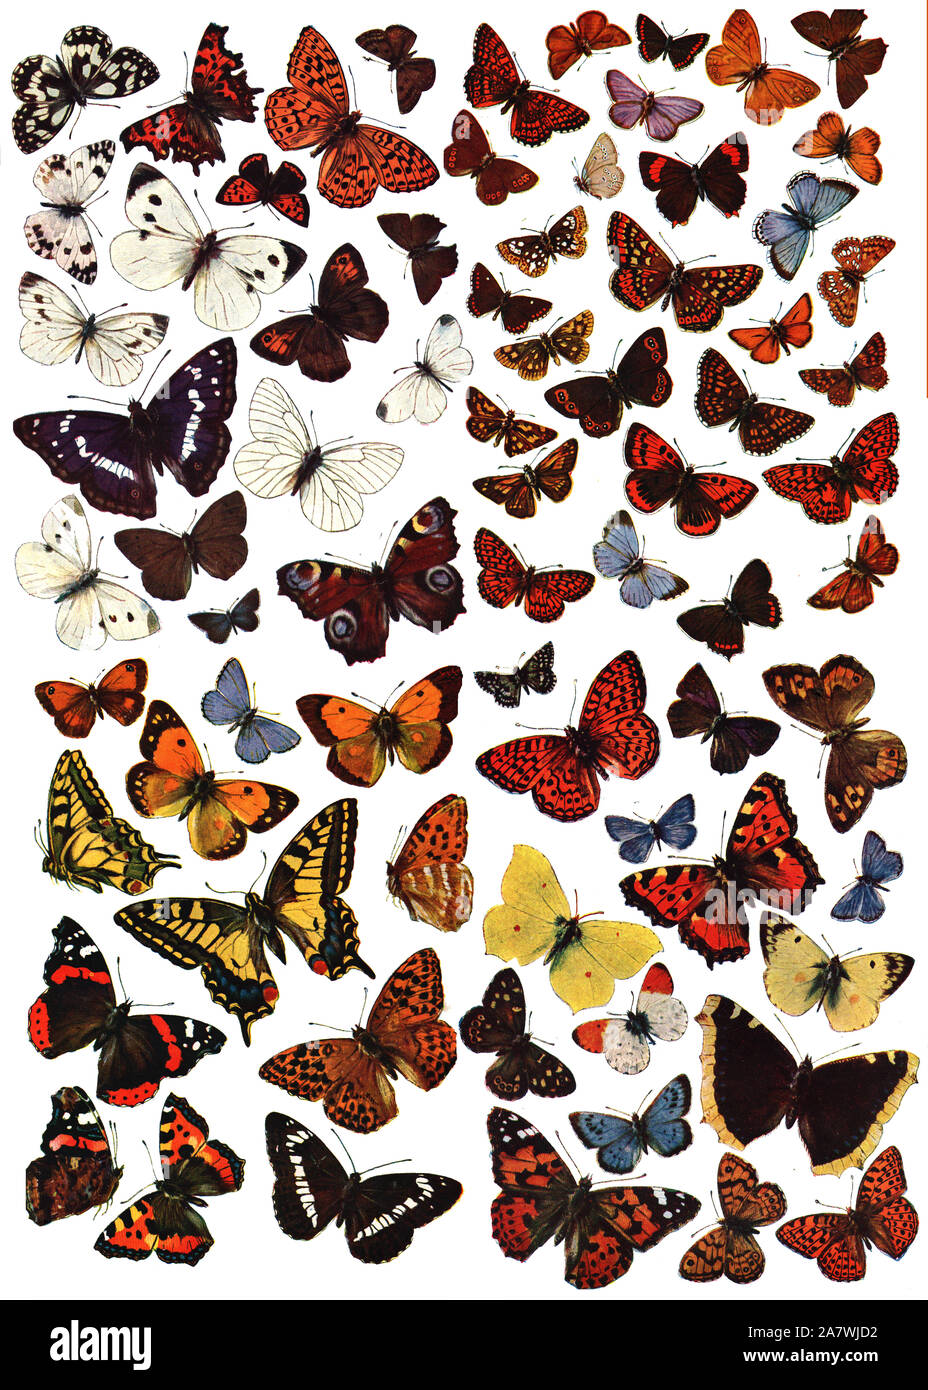 lots of Butterflies from a 1921 illustration Stock Photo